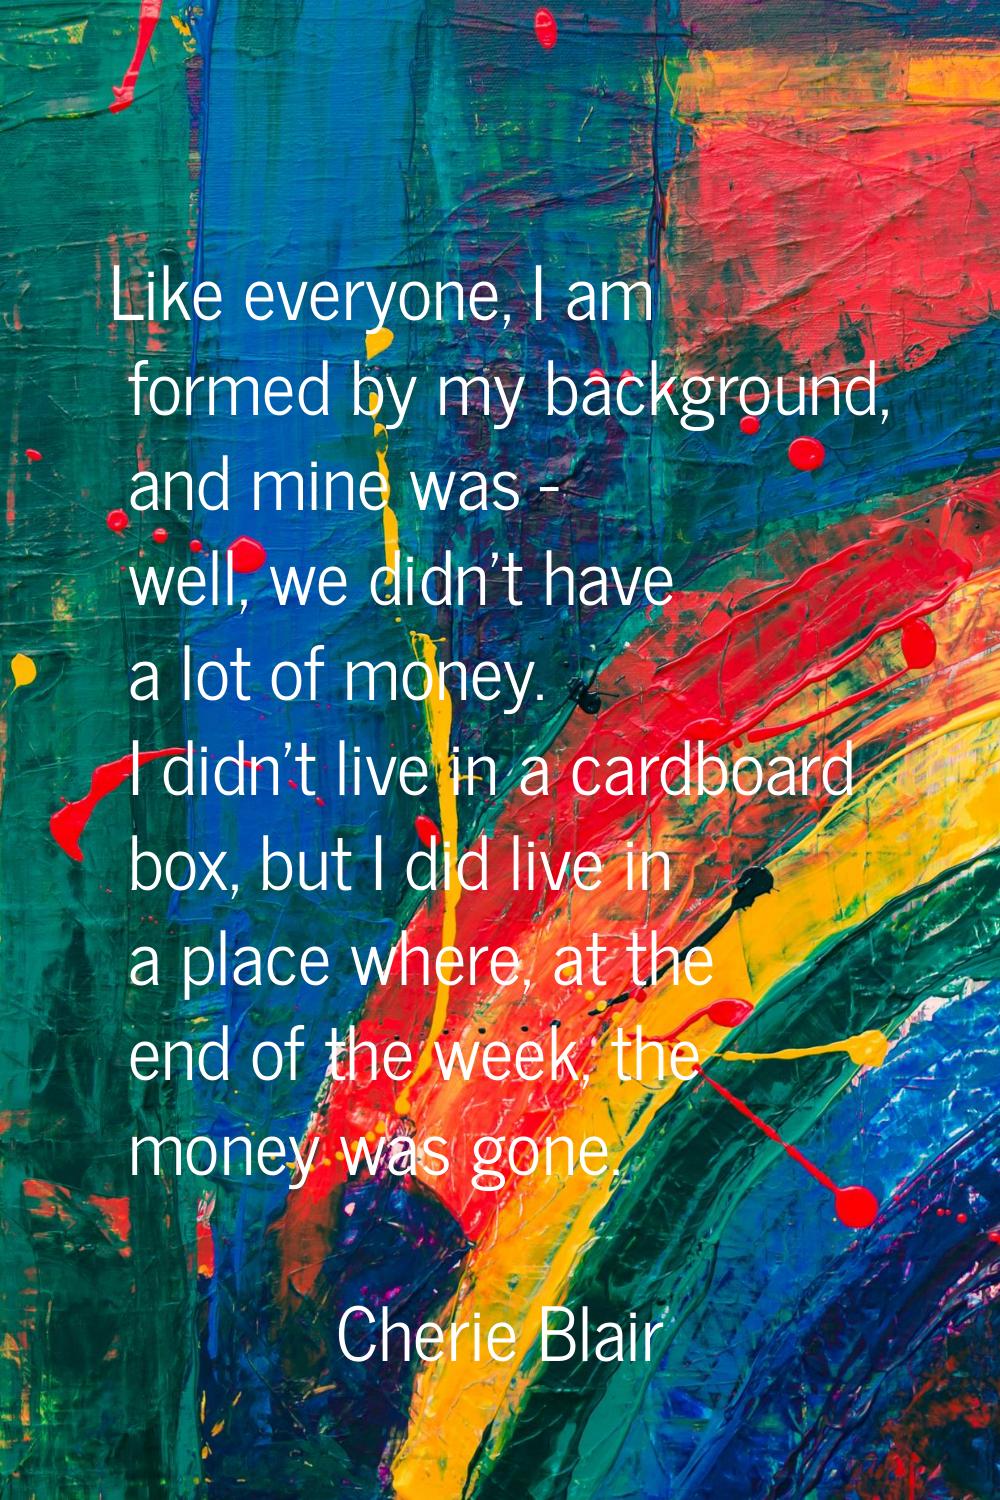 Like everyone, I am formed by my background, and mine was - well, we didn't have a lot of money. I 